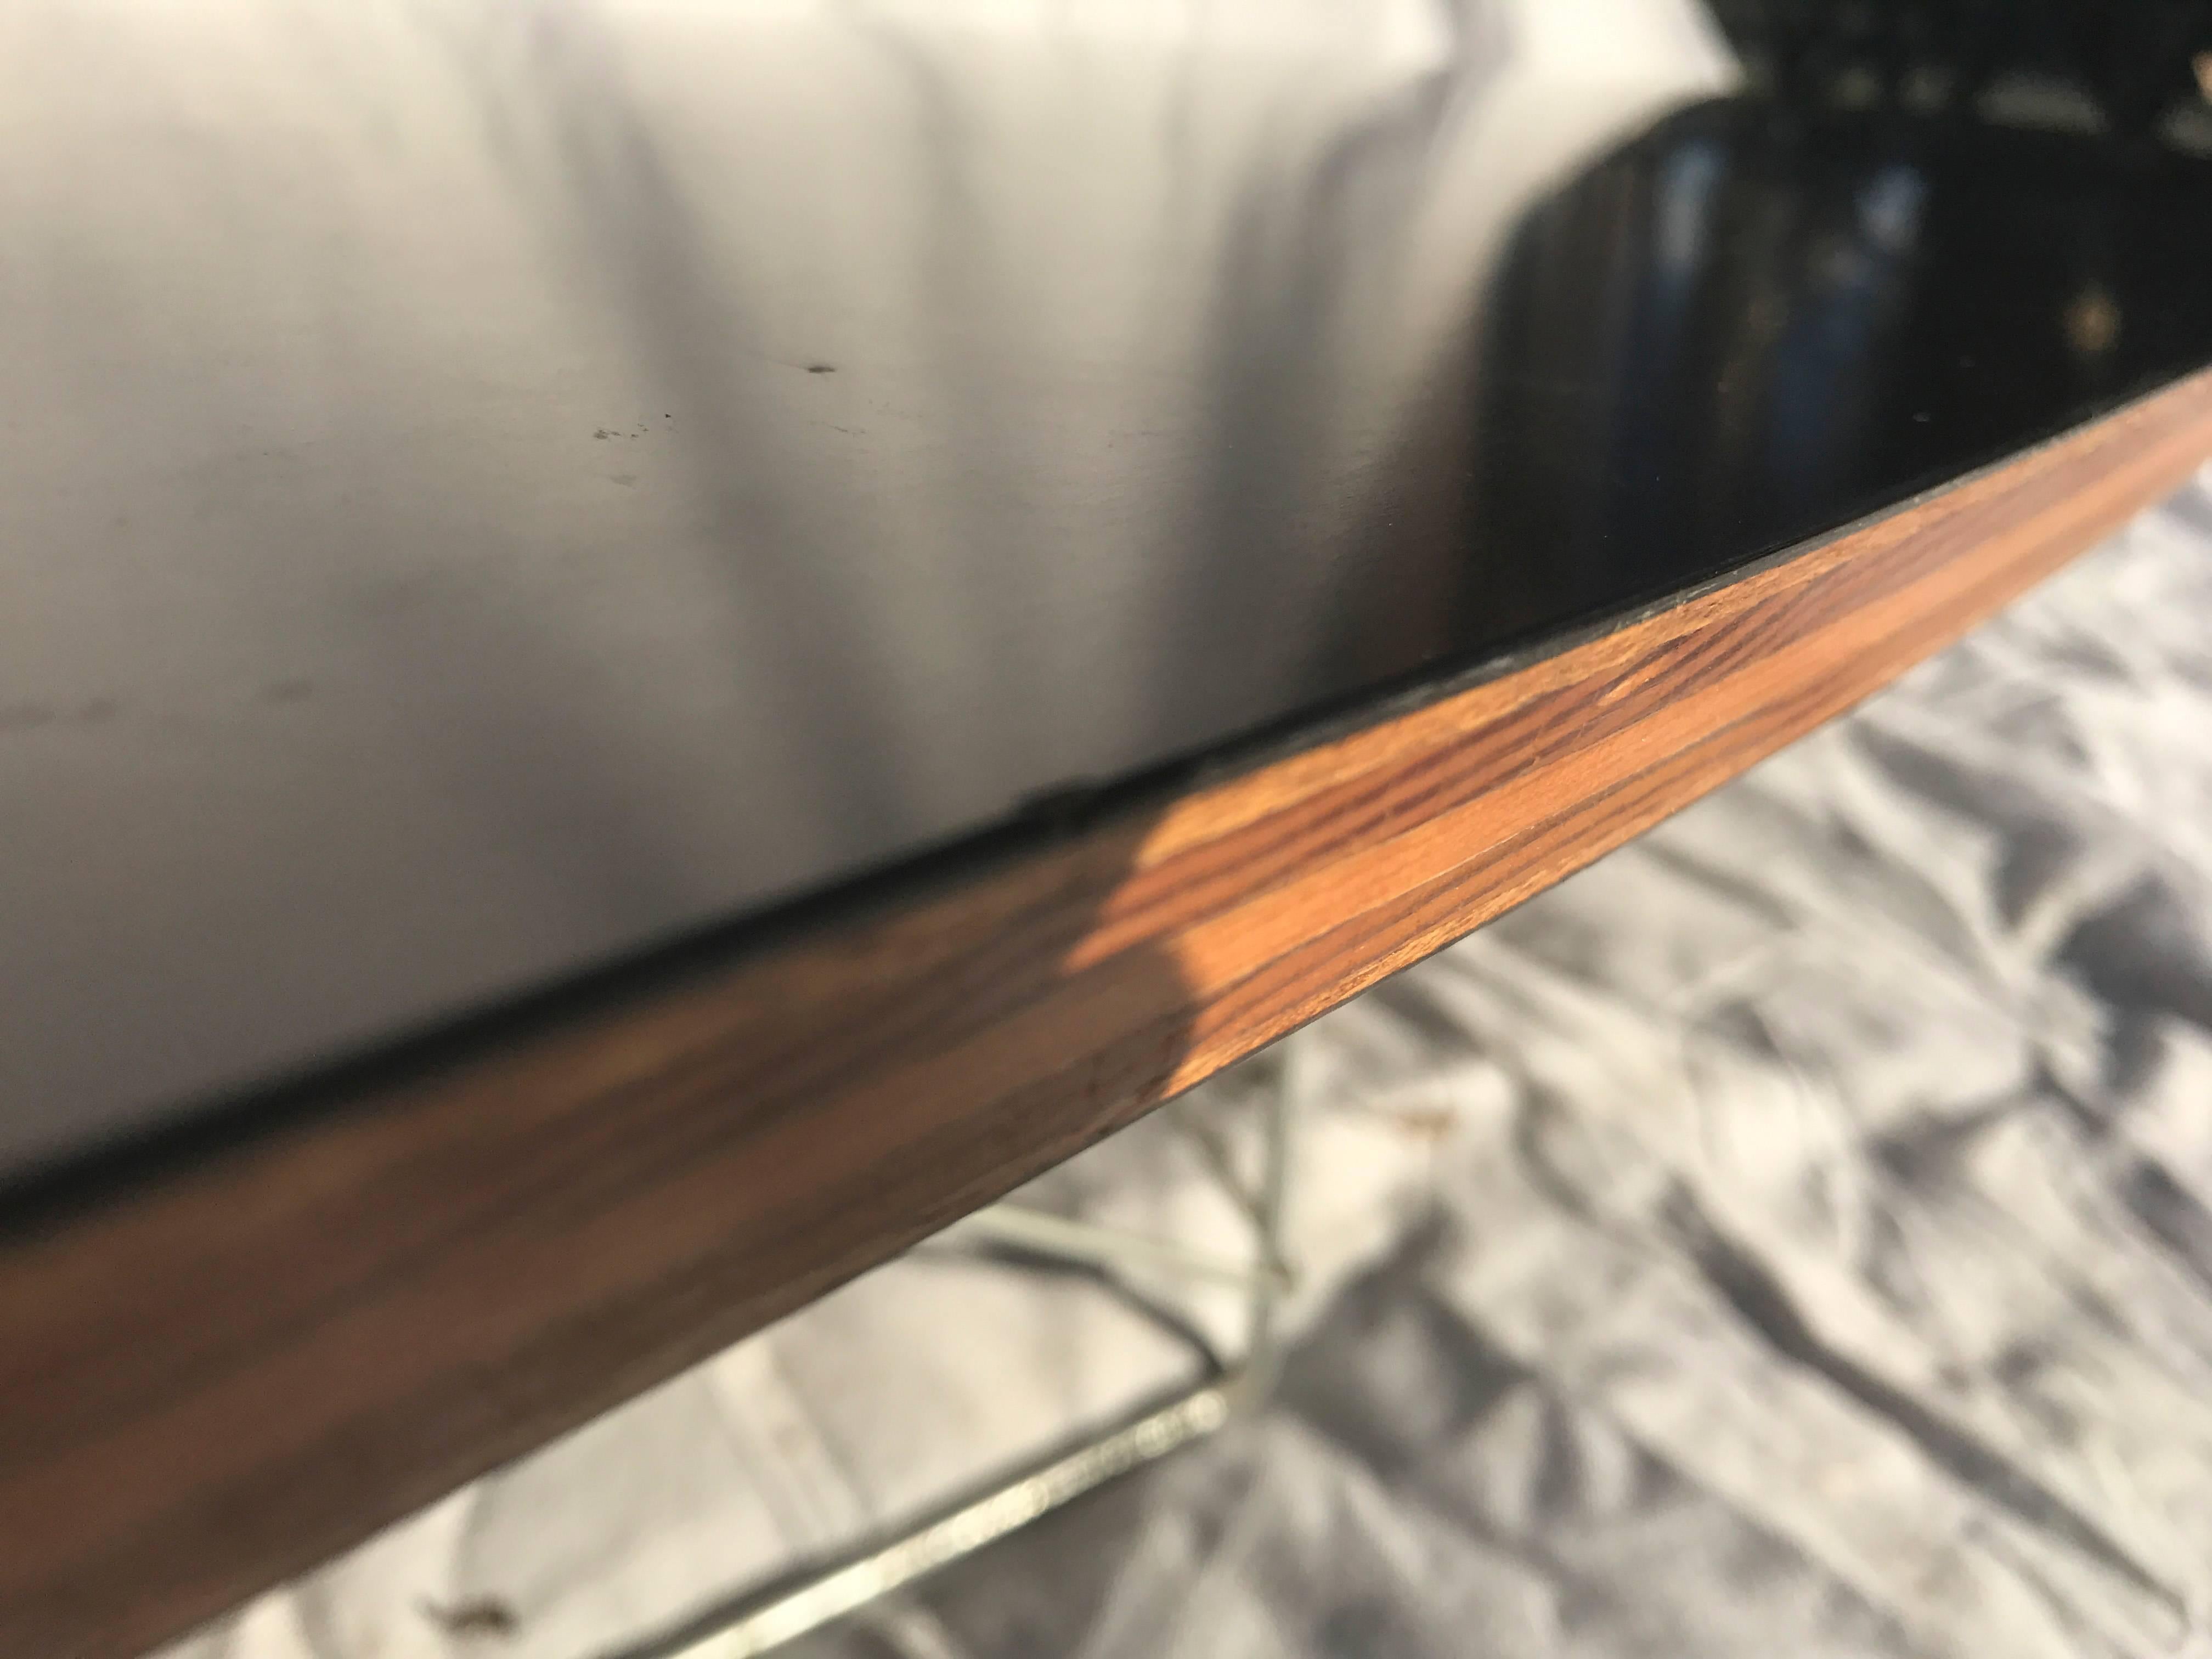 Eames Original ETR Coffee Table In Excellent Condition For Sale In Napa, CA